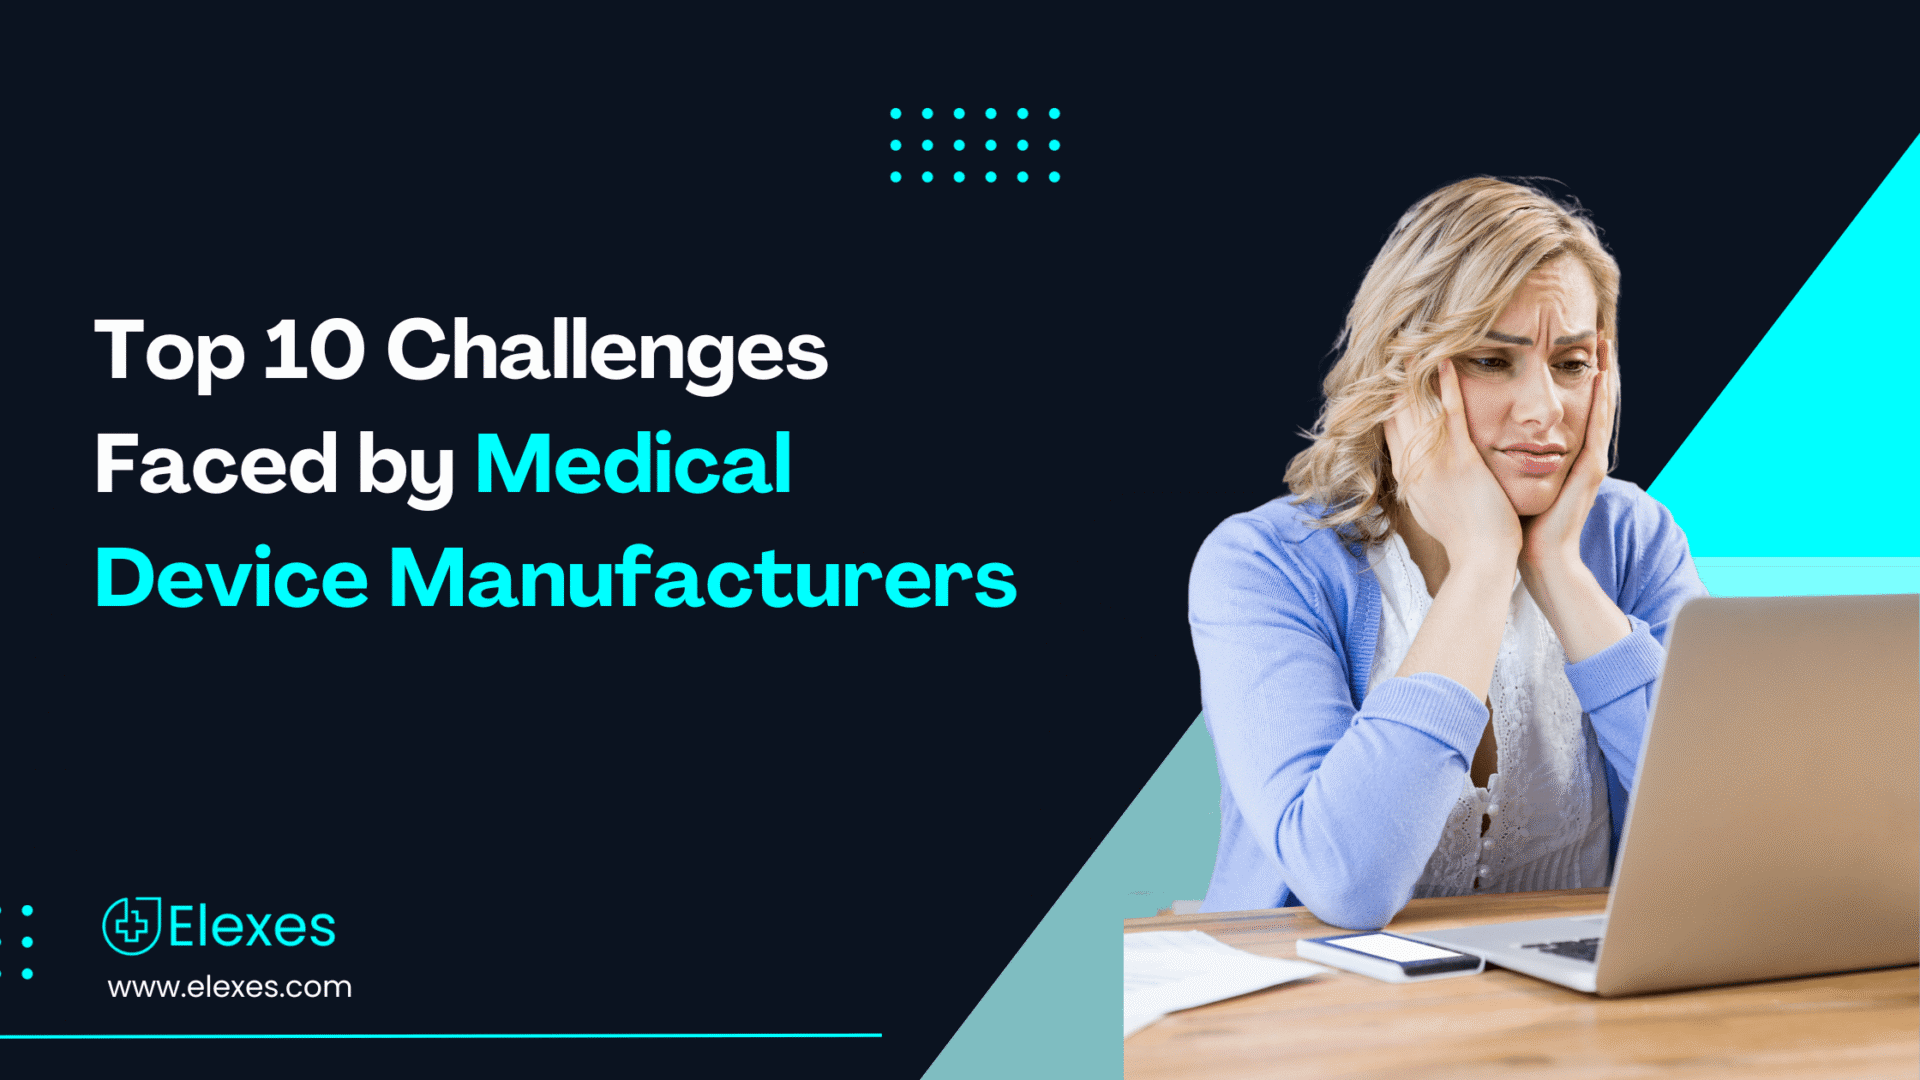 The Top 10 Challenges Faced By Medical Device Manufacturers!